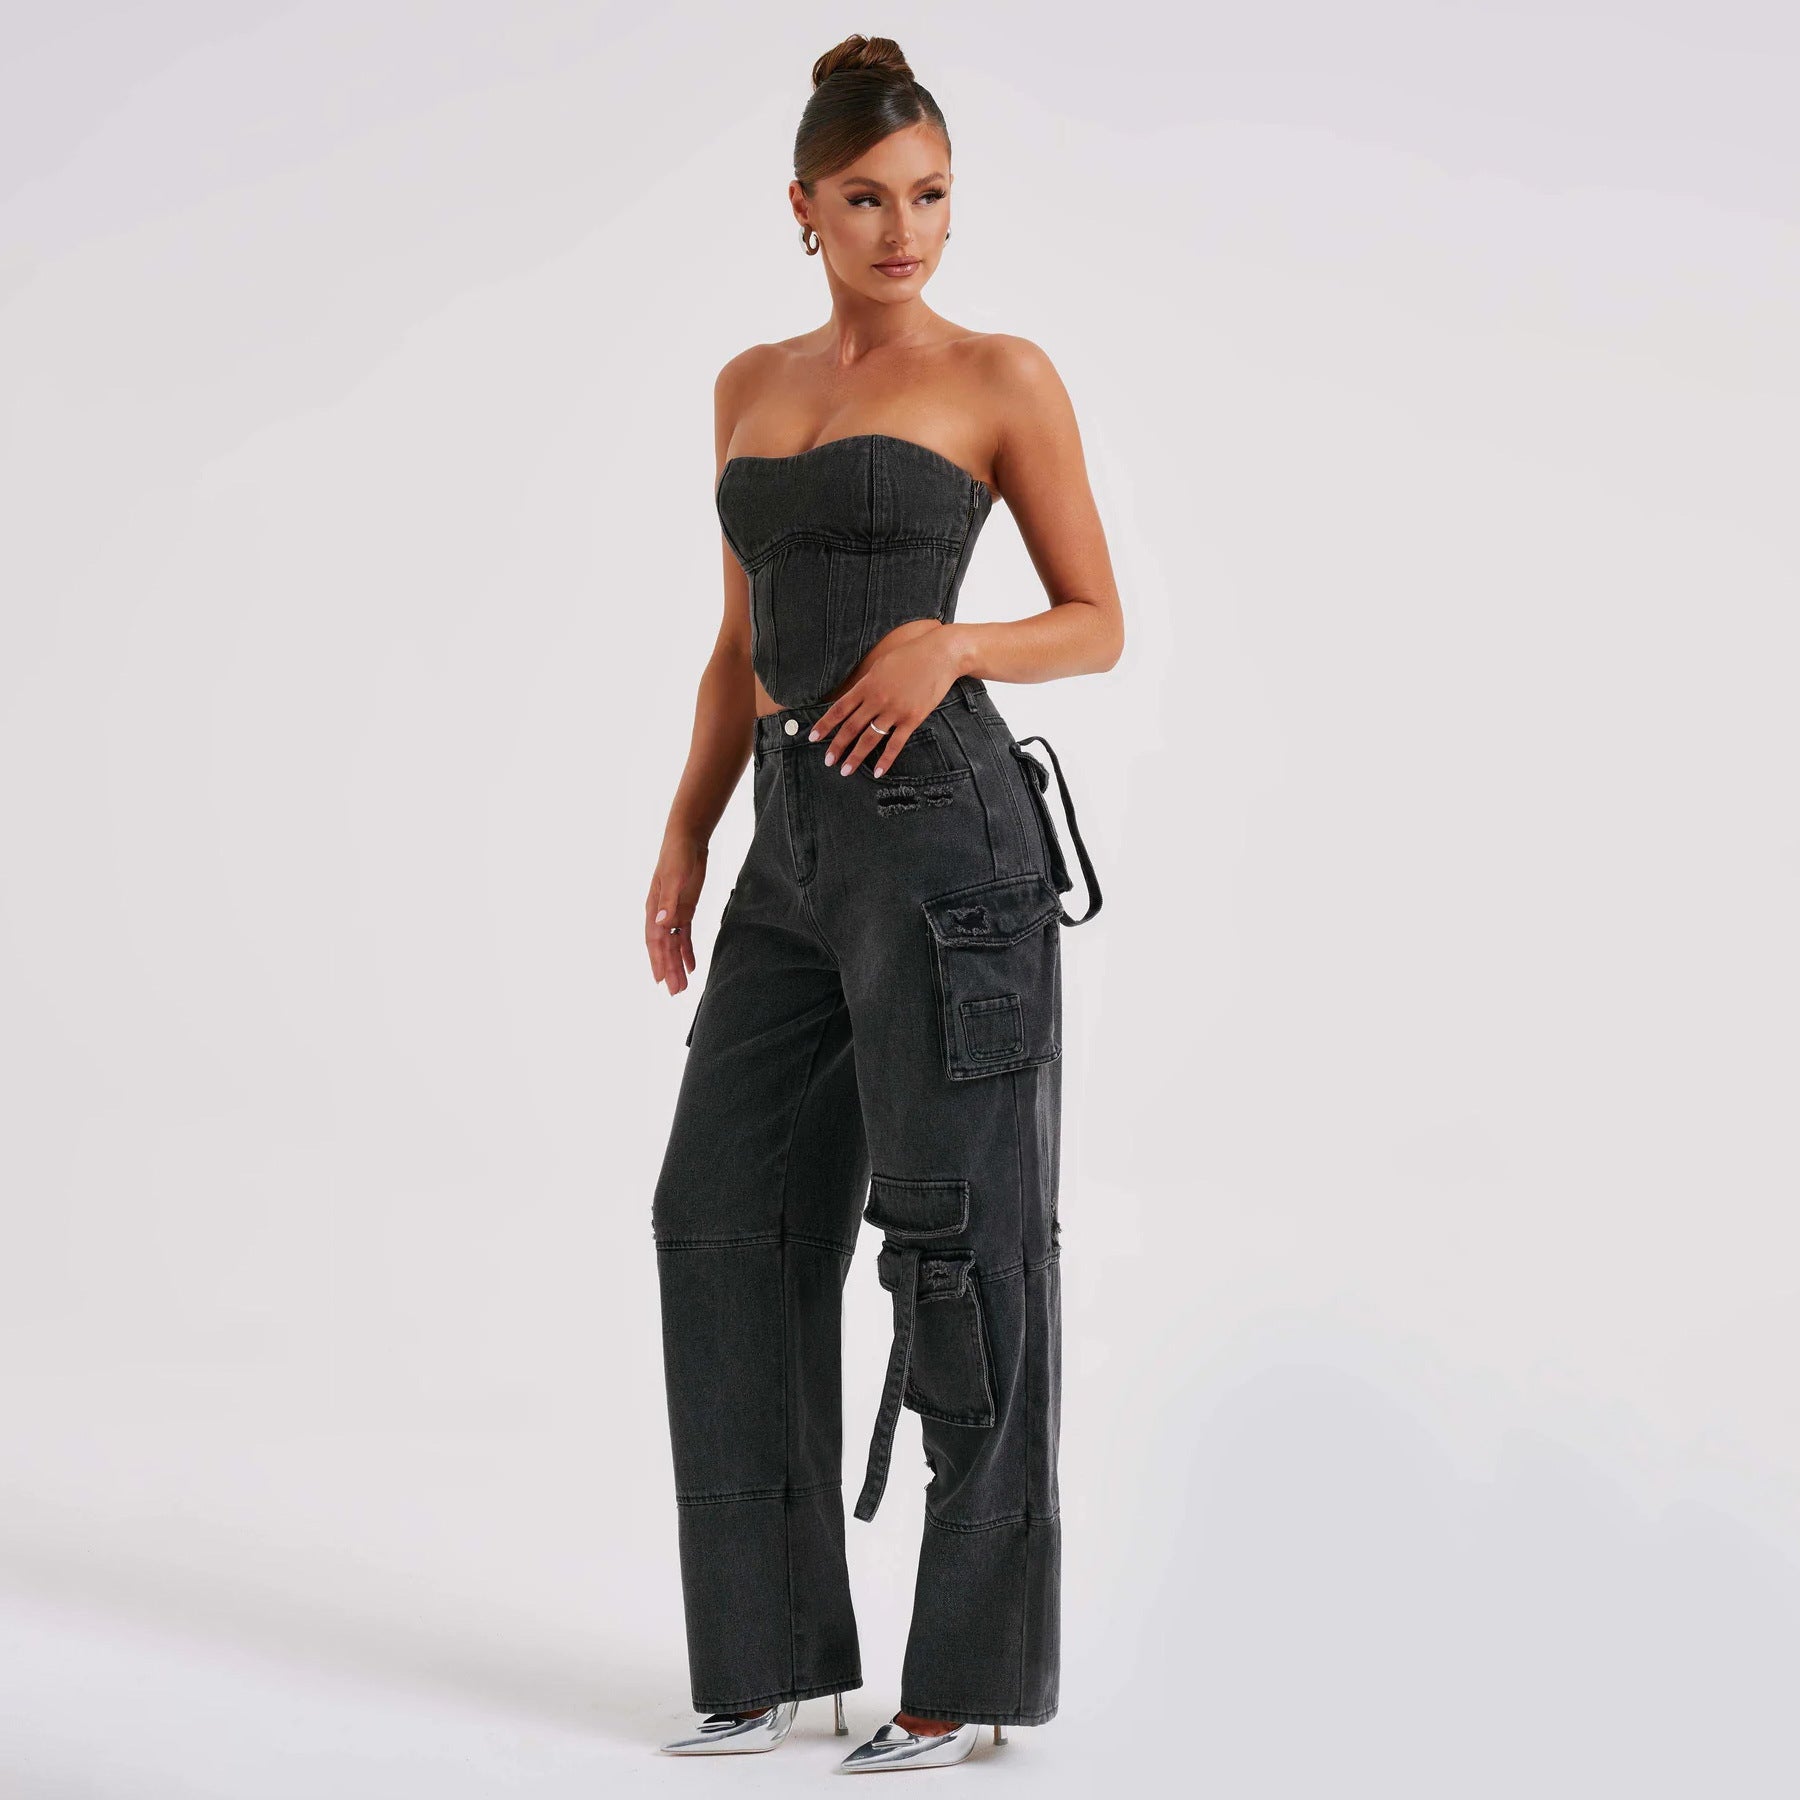 Black Set - Women's American-style Low Waist 3D Pocket Stitching Jeans, Vest, or Outfit Set - womens jeans at TFC&H Co.